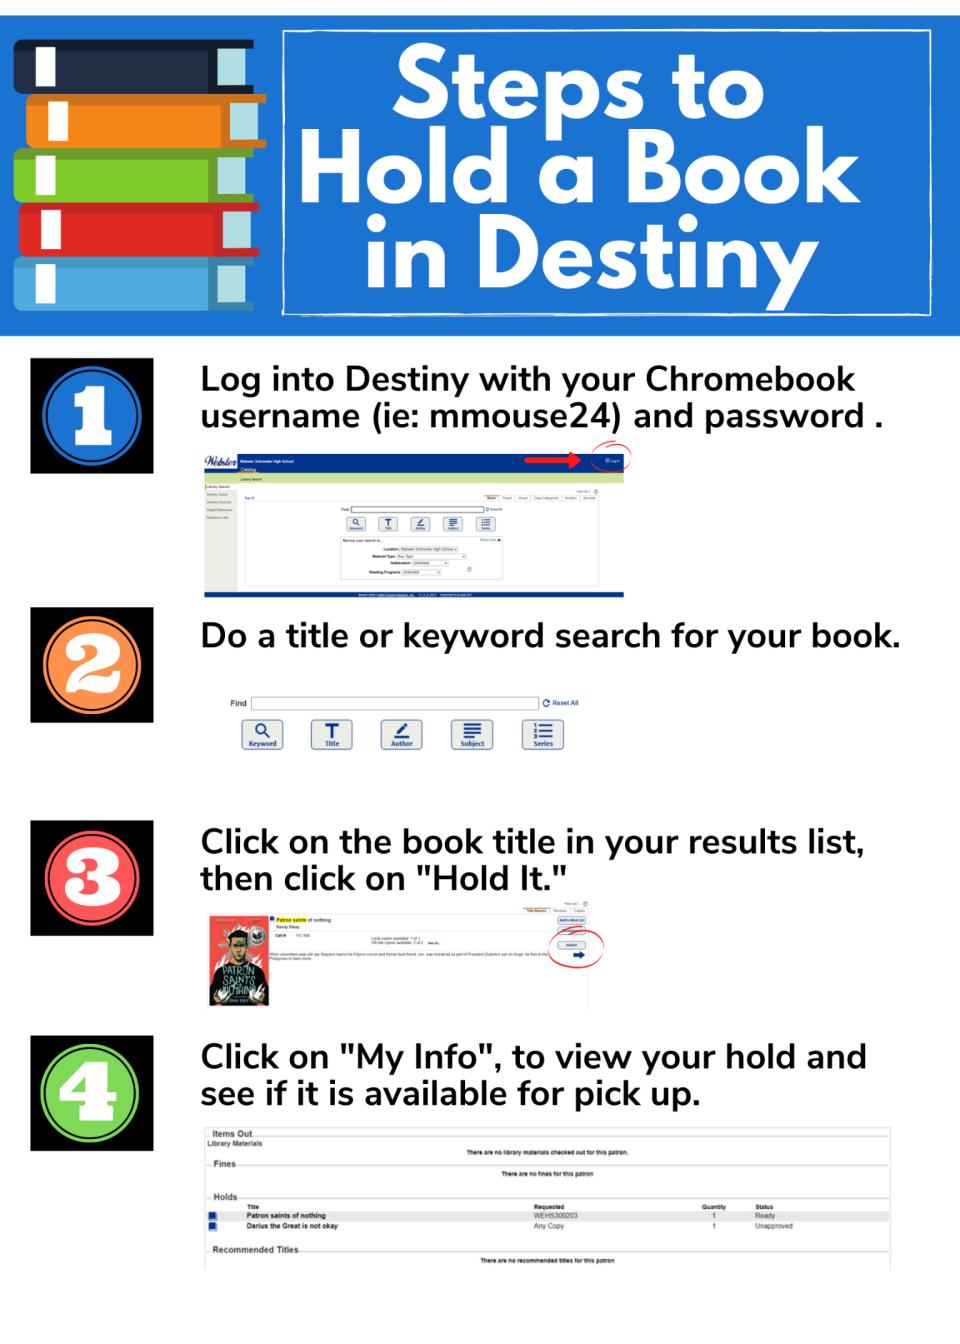 Steps to Hold a Book in Destiny